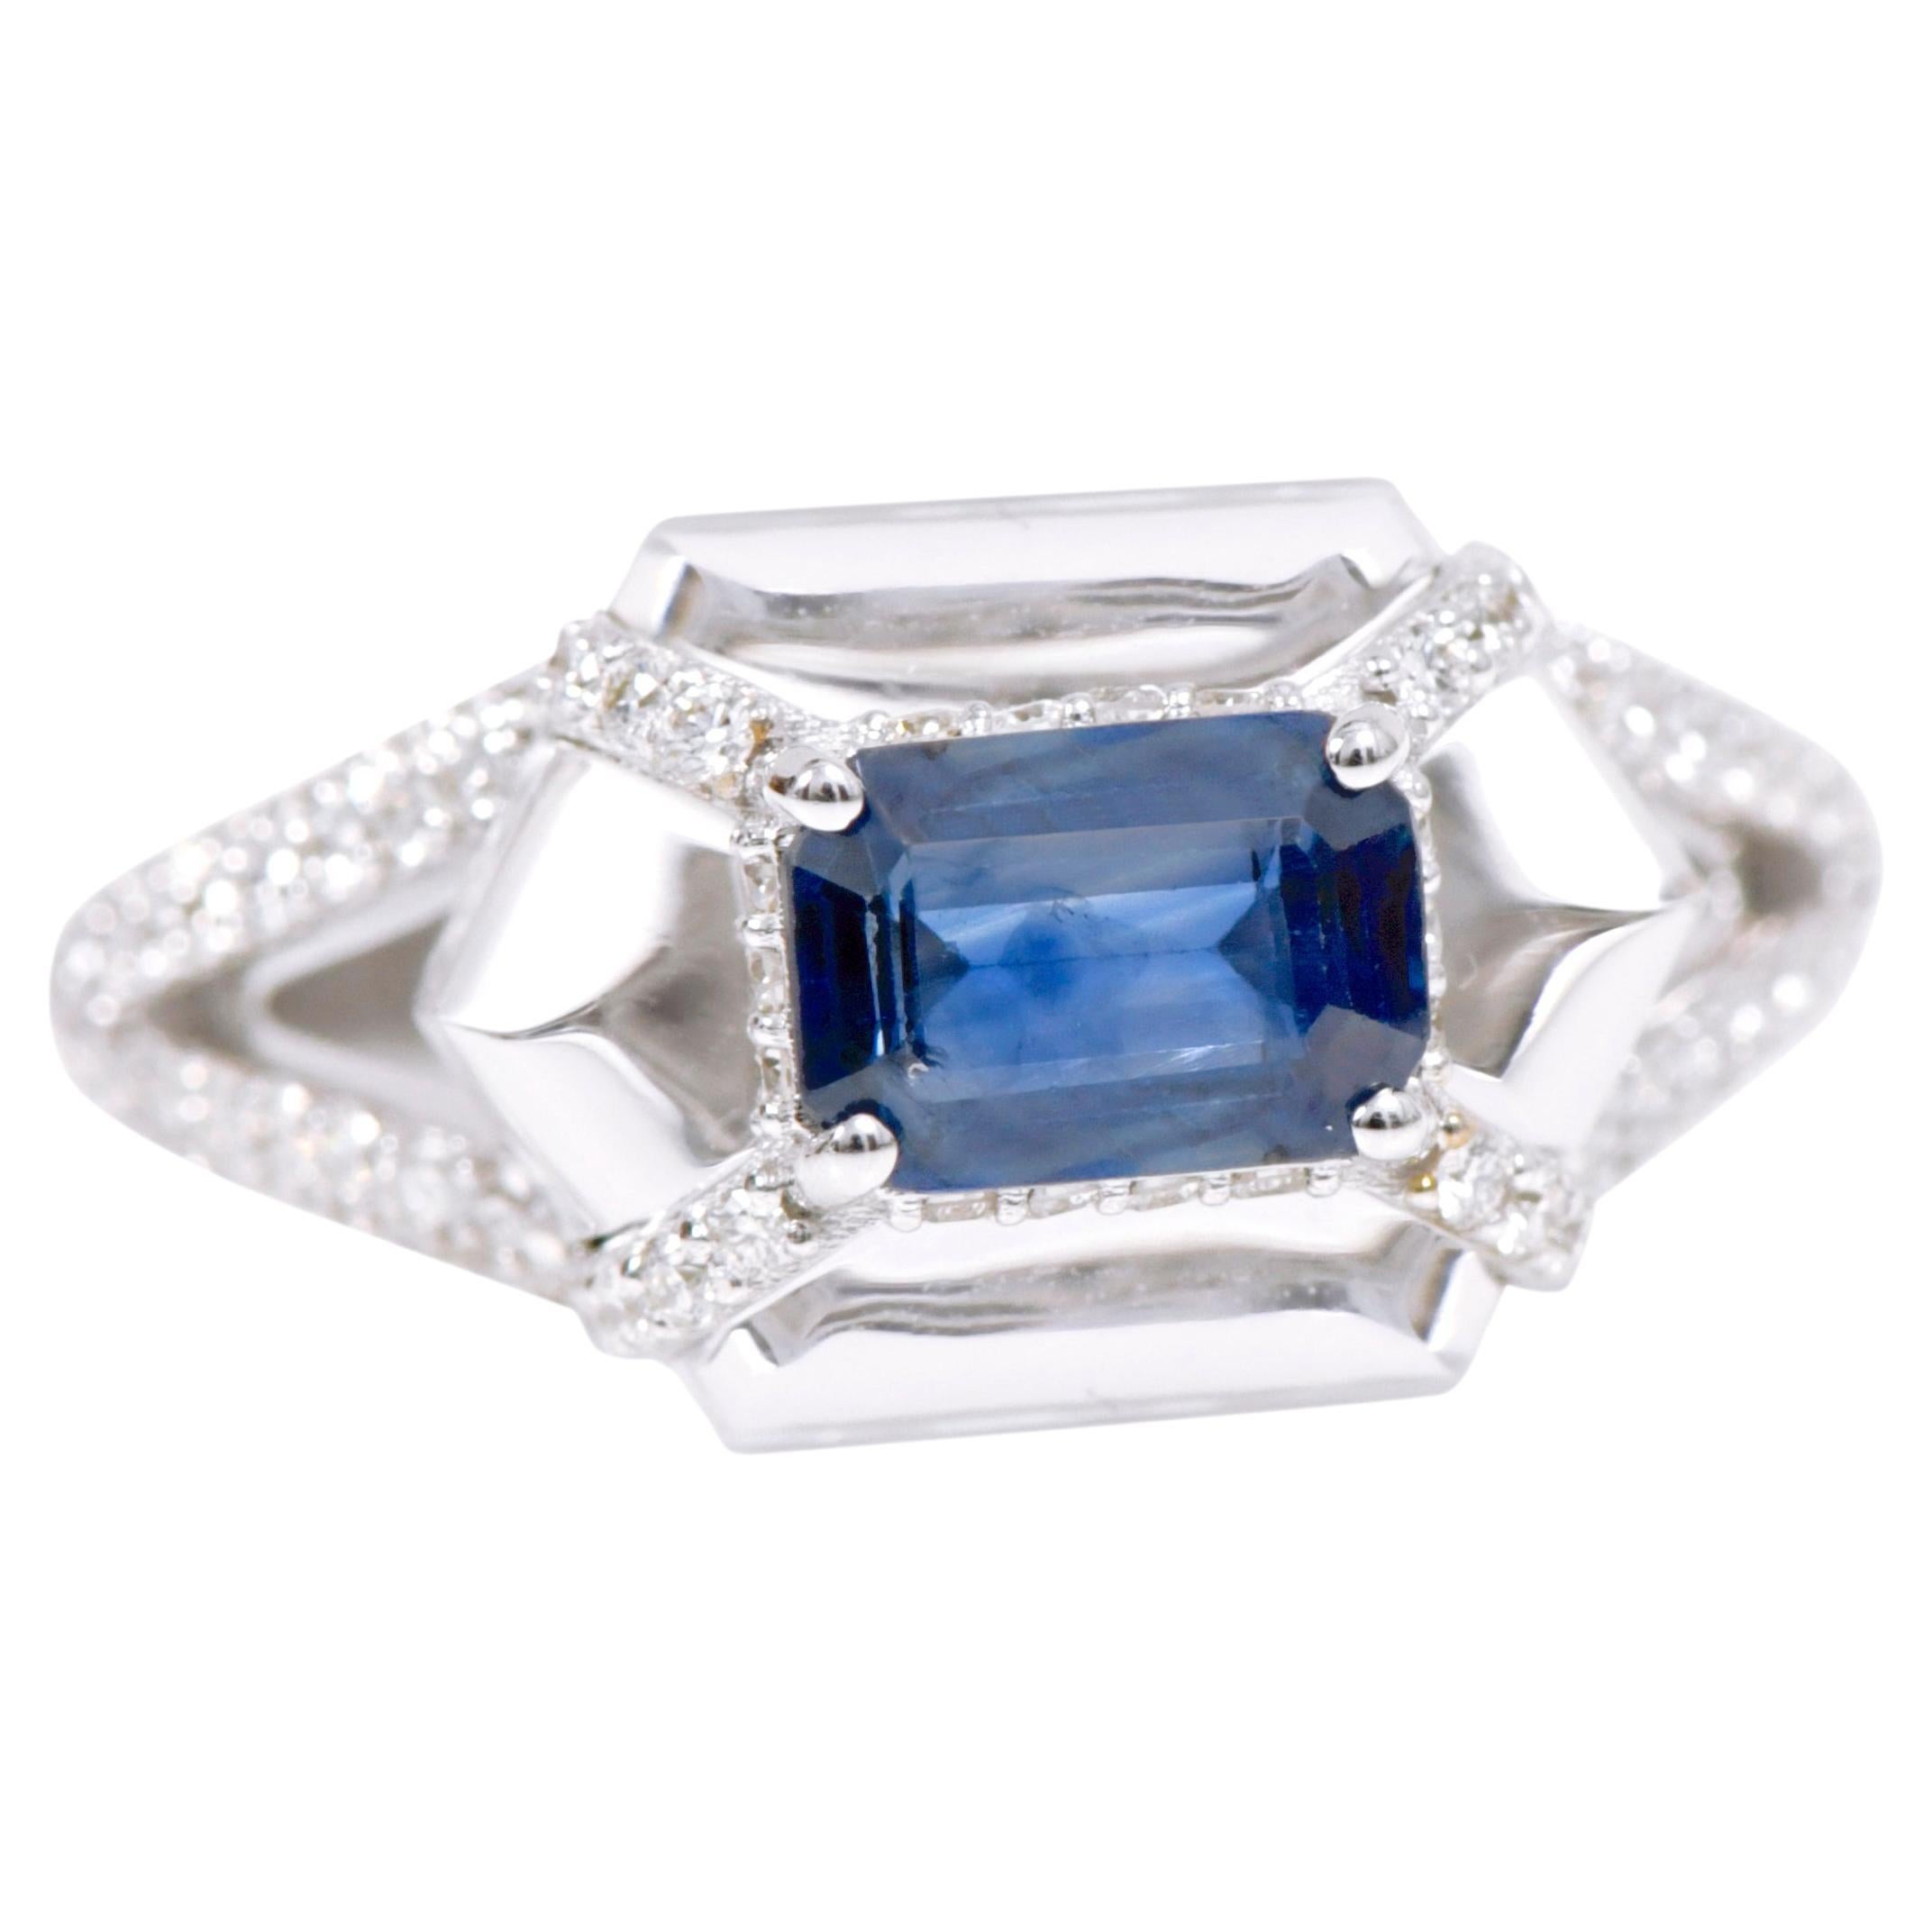 18 Karat White Gold 5.13 Carat Diamond, Sapphire, and Crystal Fashion Ring For Sale